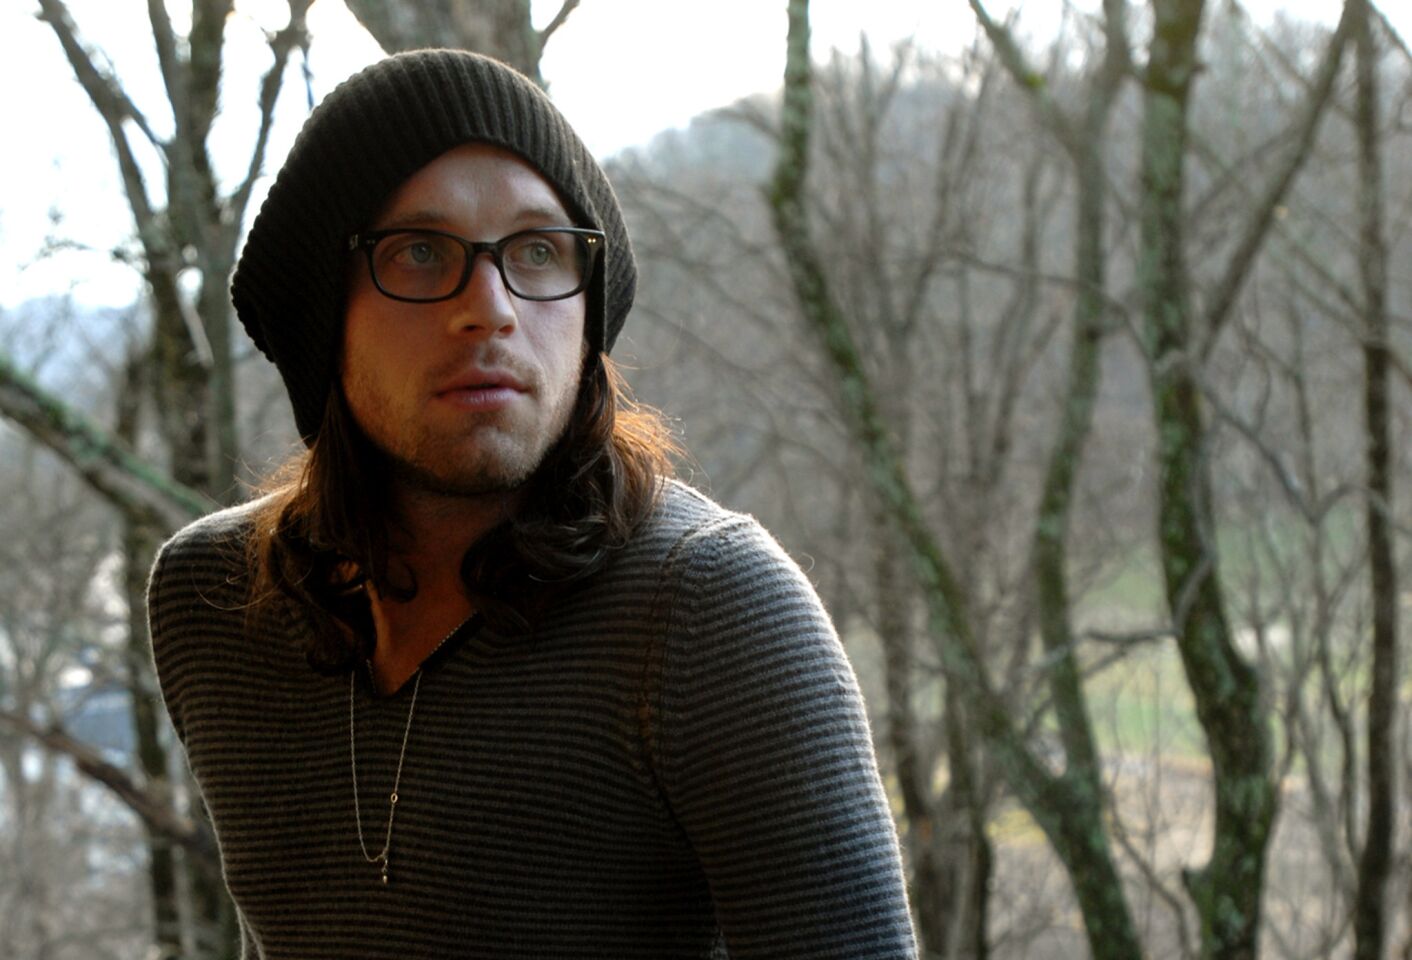 Here's some lovely news from the house of Followill: Kings of Leon drummer Nathan Followill is a dad! The hot, bespectacled hipster welcomed a girl Dec. 26, 2012, with his singer/songwriter wife, Jessie Baylin, a rep for the couple said in a statement. First things first: Cheers, little Followill, you just missed the curse of the Christmas baby. Secondly, Violet Marlowe Followill clocked in at 7 pounds, 13 ounces, and was delivered in Nashville.MORE: Nathan Followill of Kings of Leon welcomes baby girl